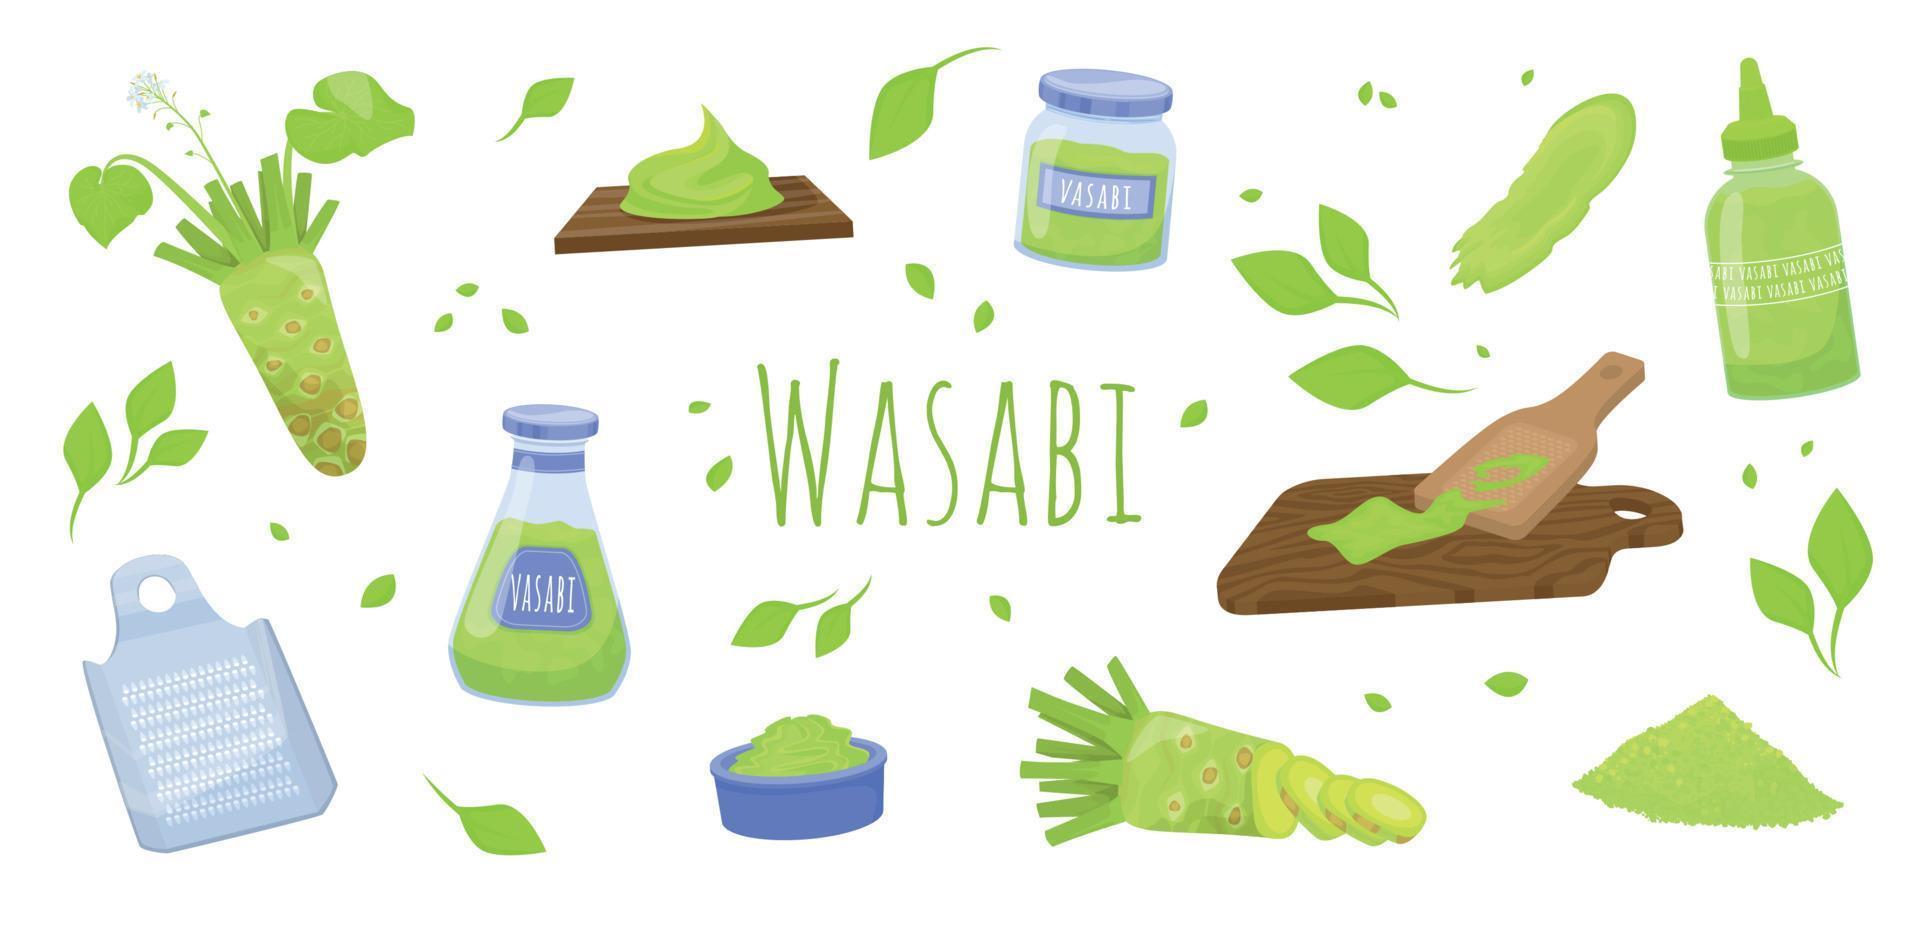 Wasabi Flat Icons Composition vector